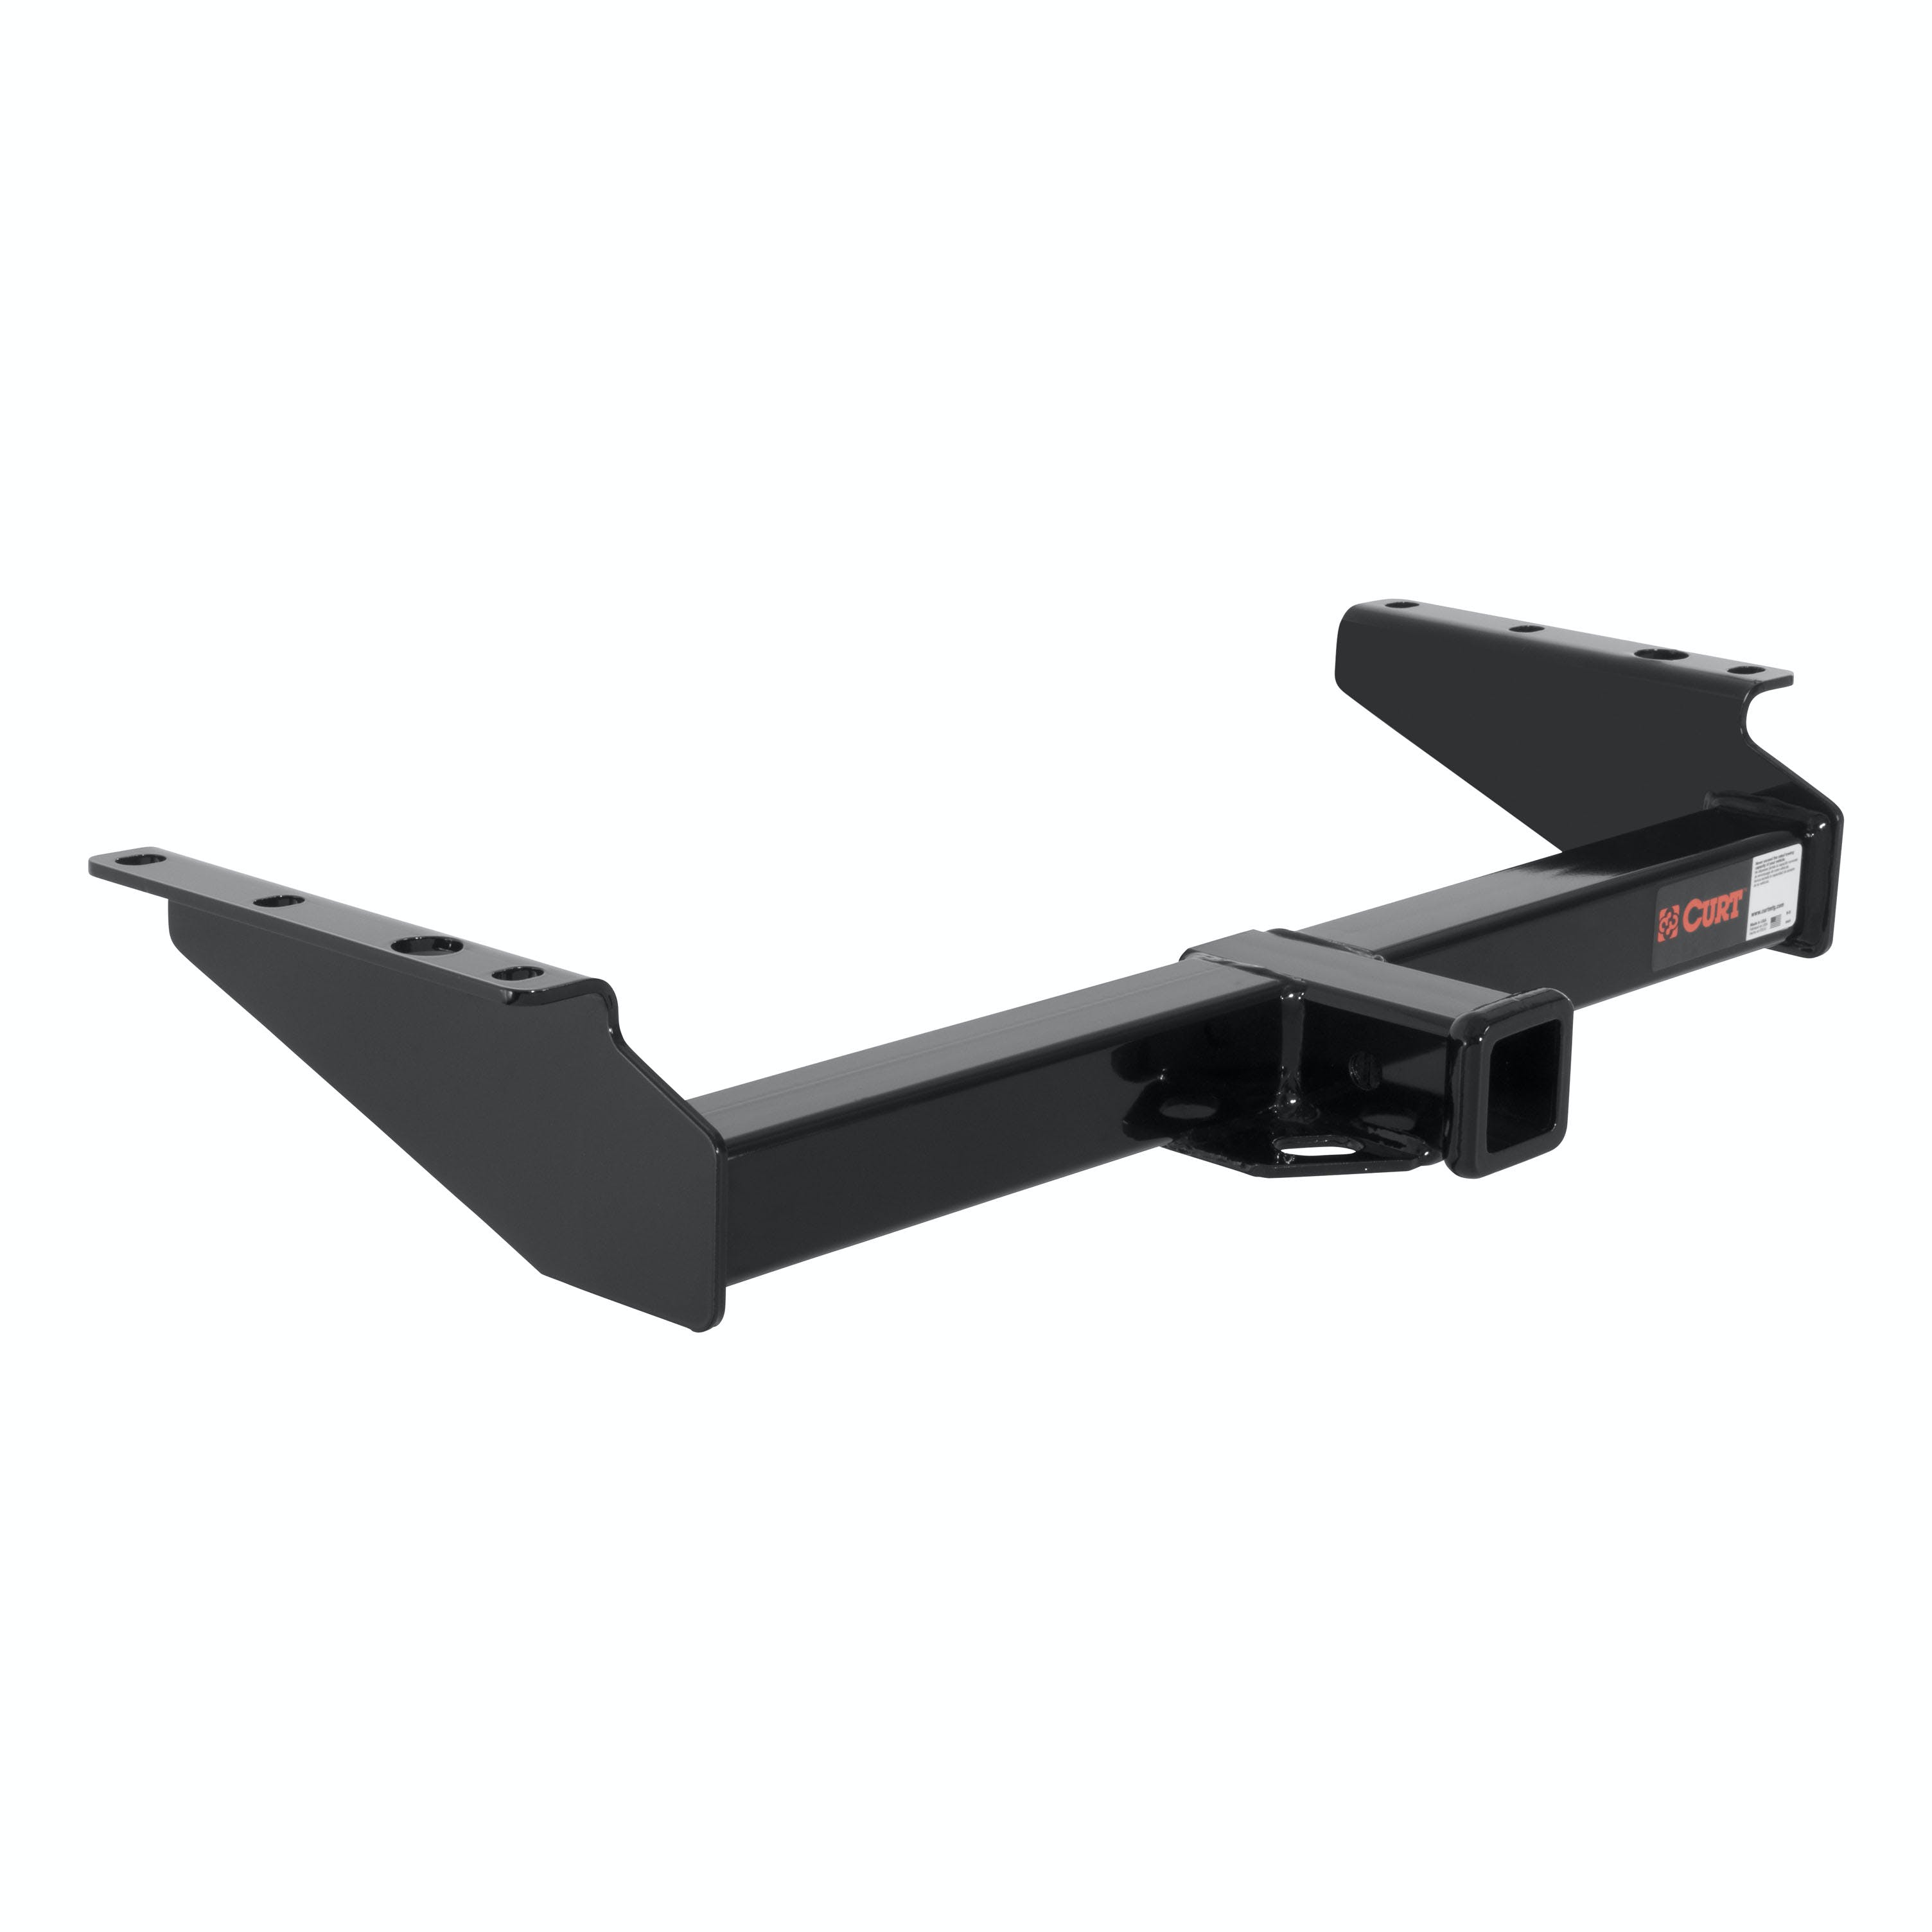 CURT 13029 Class 3 Hitch, 2, Select Cadillac, Chevrolet, GMC Trucks (Square Tube Frame)